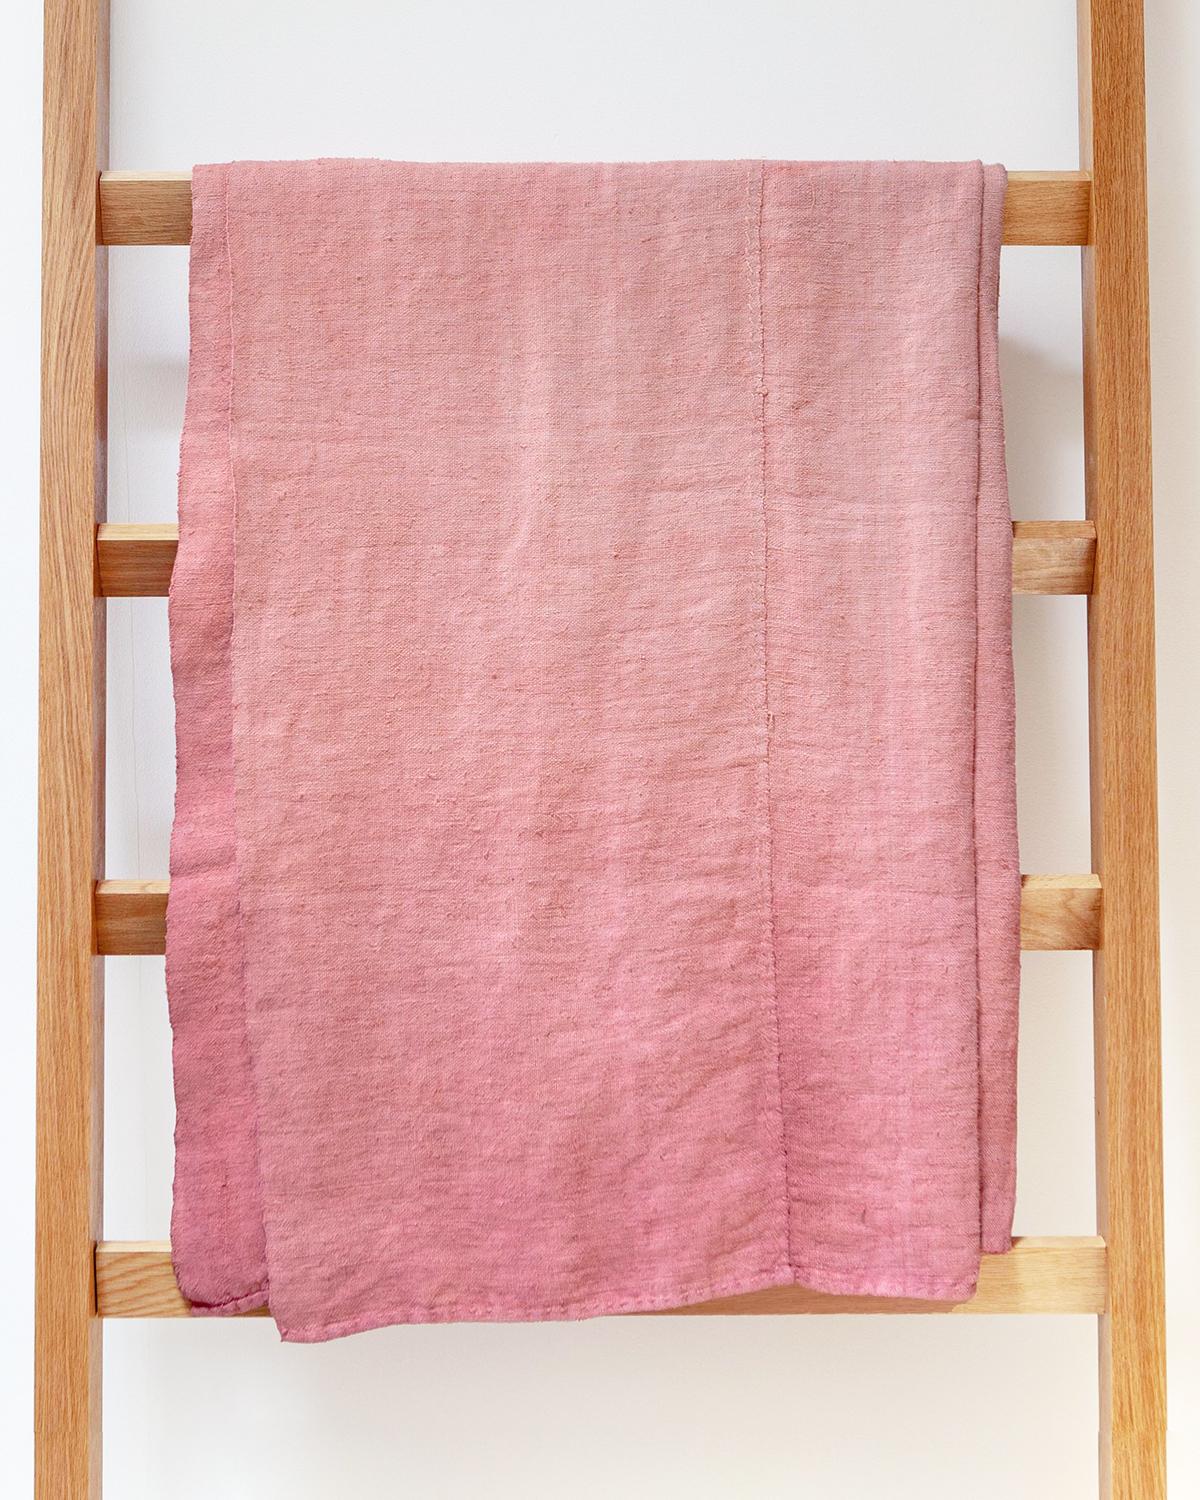 An understated pink ombre throw for your bedroom. This vintage linen throw is hand-painted in a beautiful pink hue with rustic distressed detail, creating a subtle yet cozy atmosphere. Perfect for the bedroom, this rustic European throw will bring a